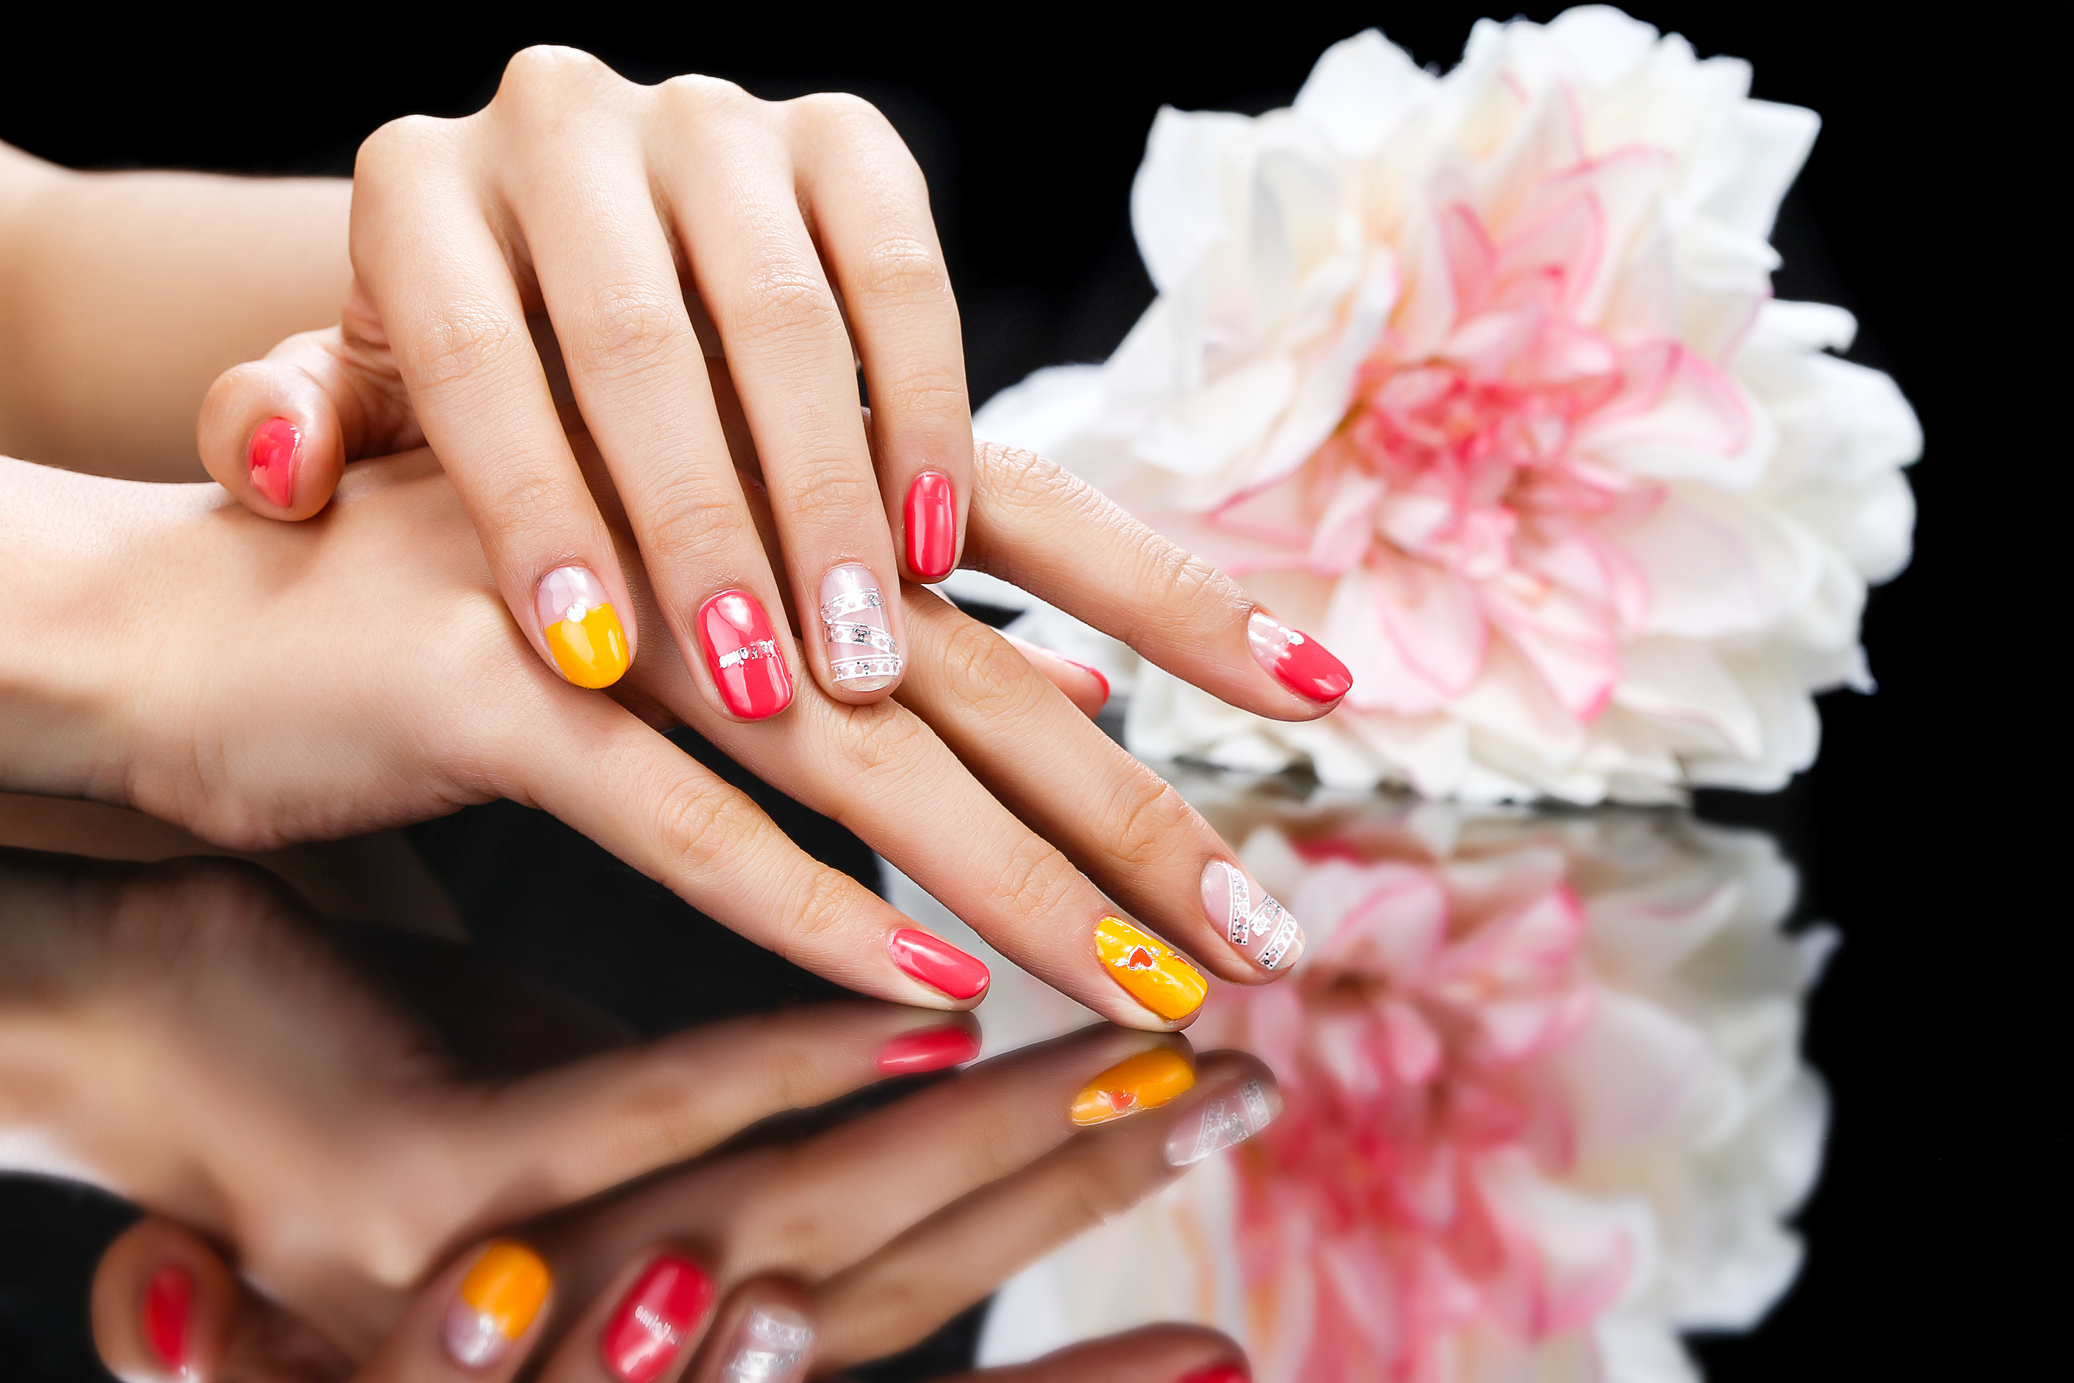 a person's hands with colorful manicured nails and a flower